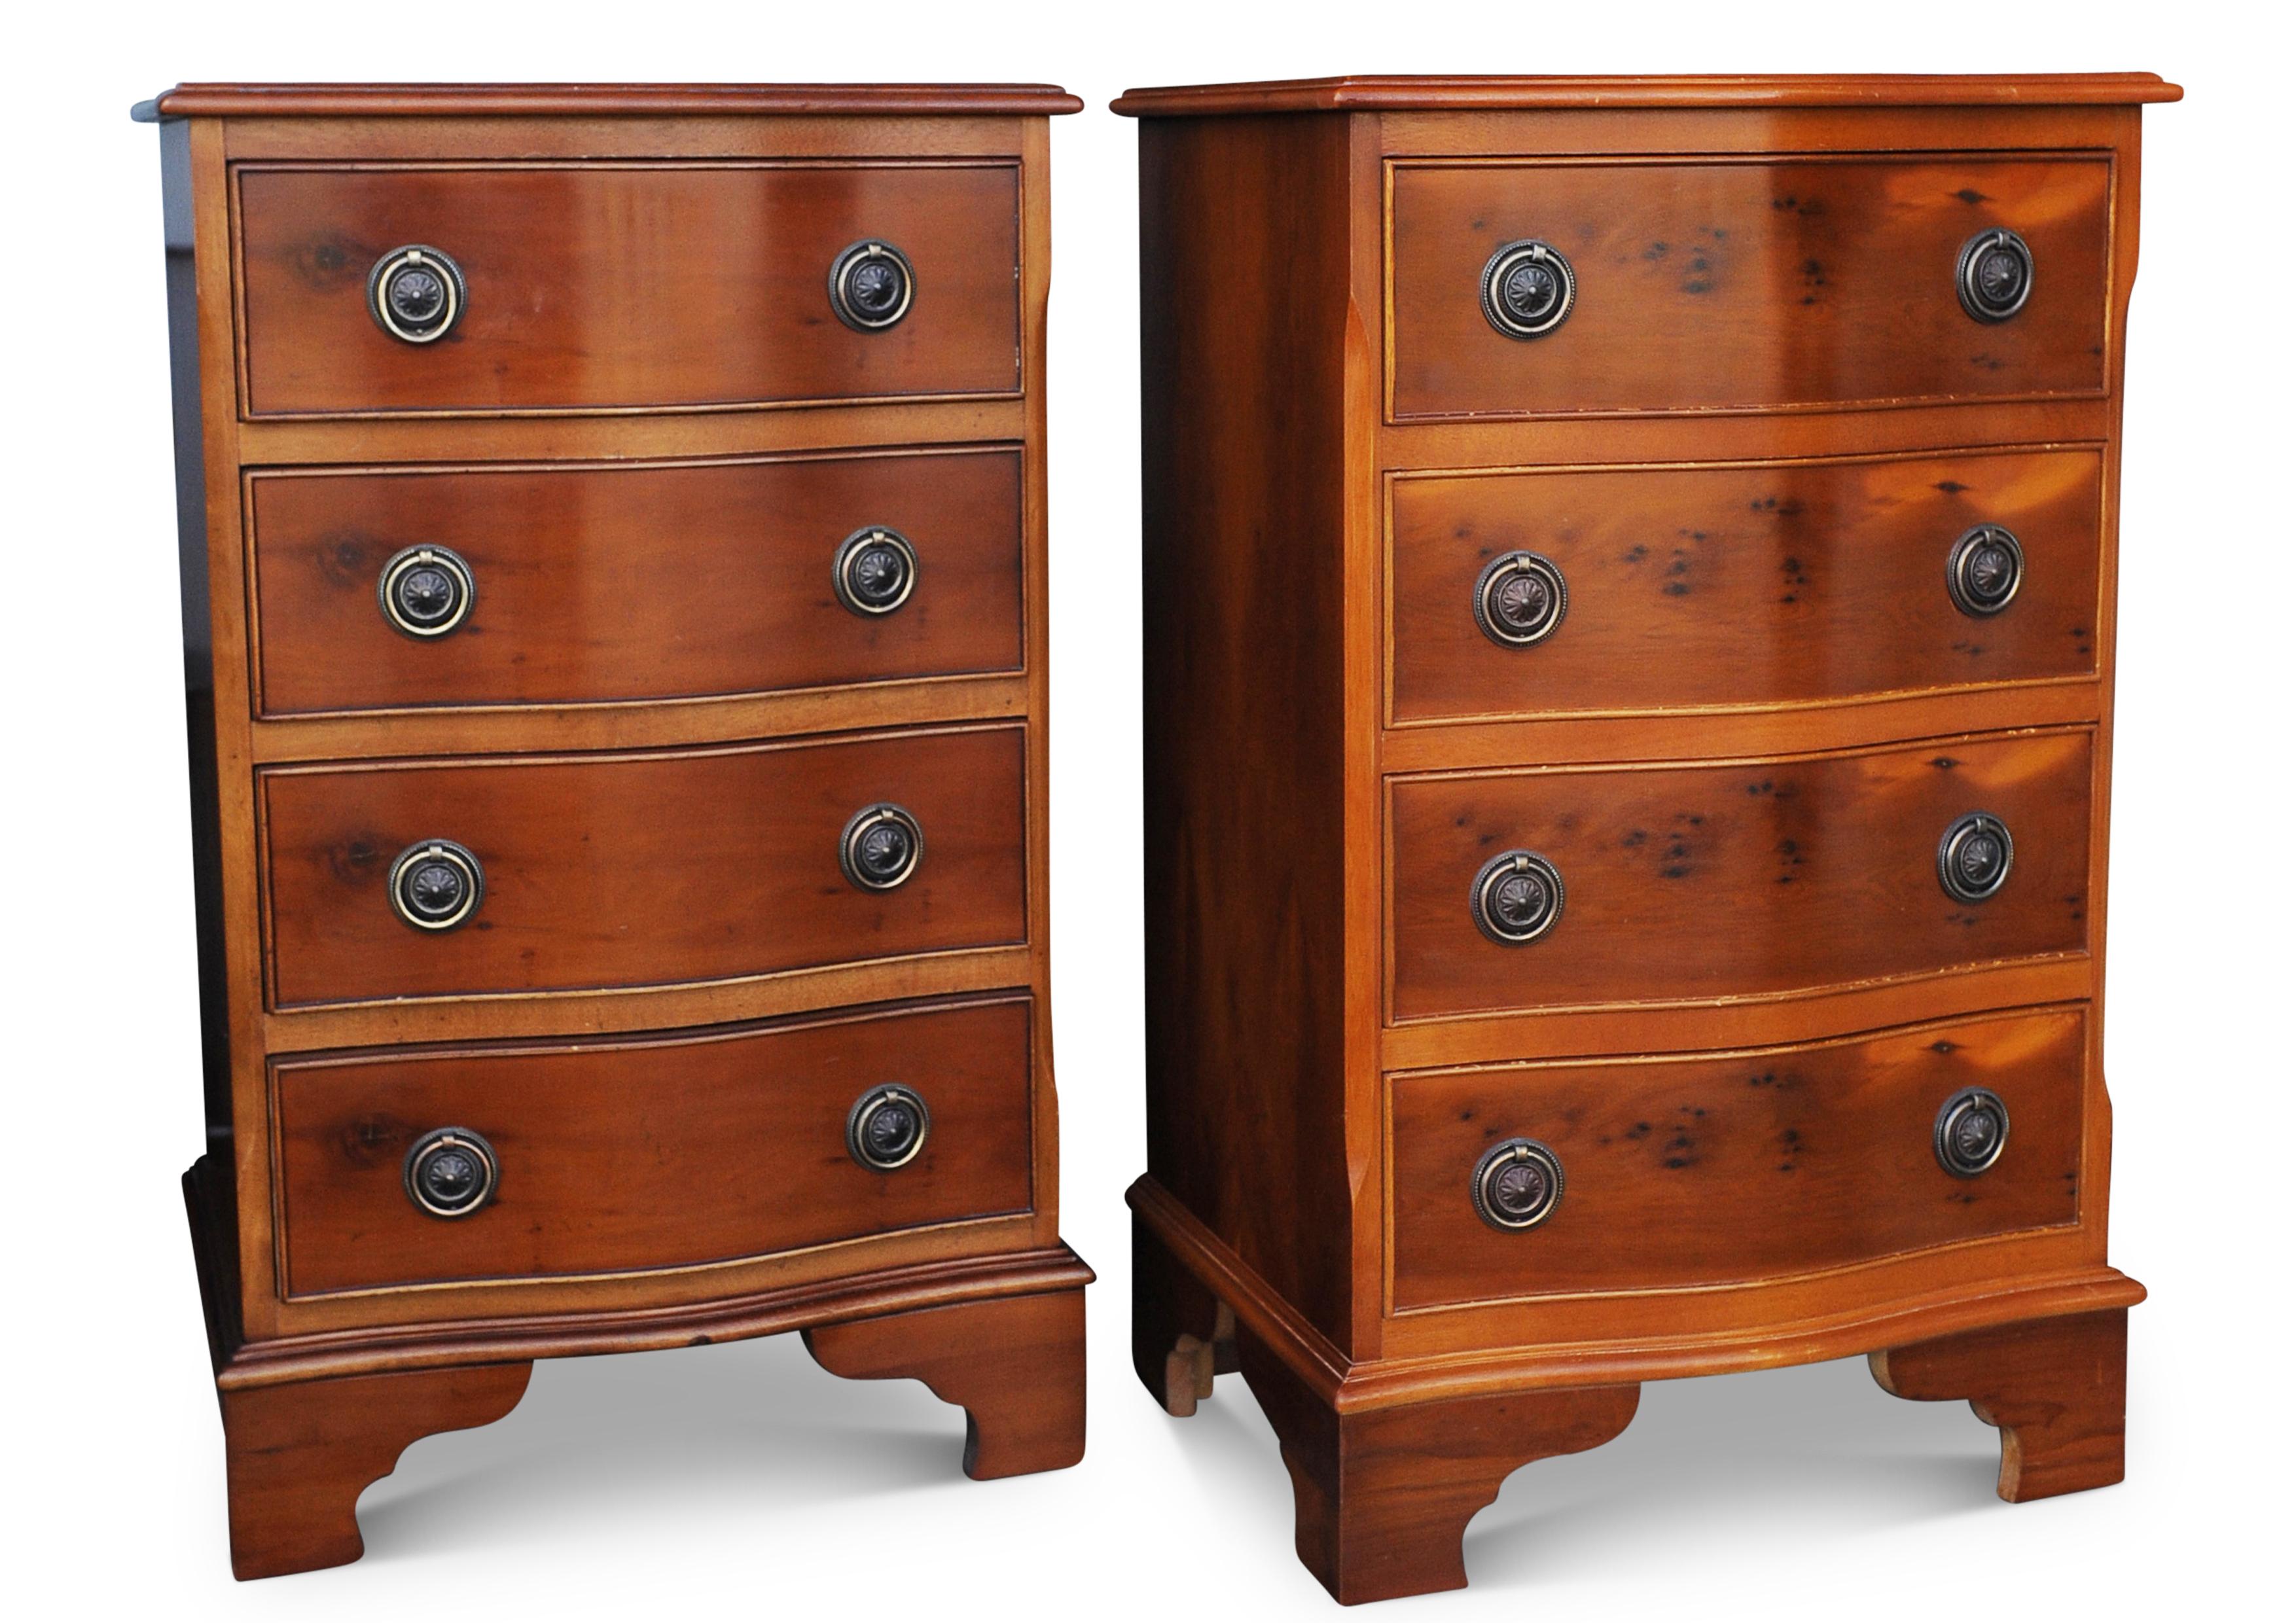 Pair of Yew wood serpentine front four drawer bedside cabinets

.